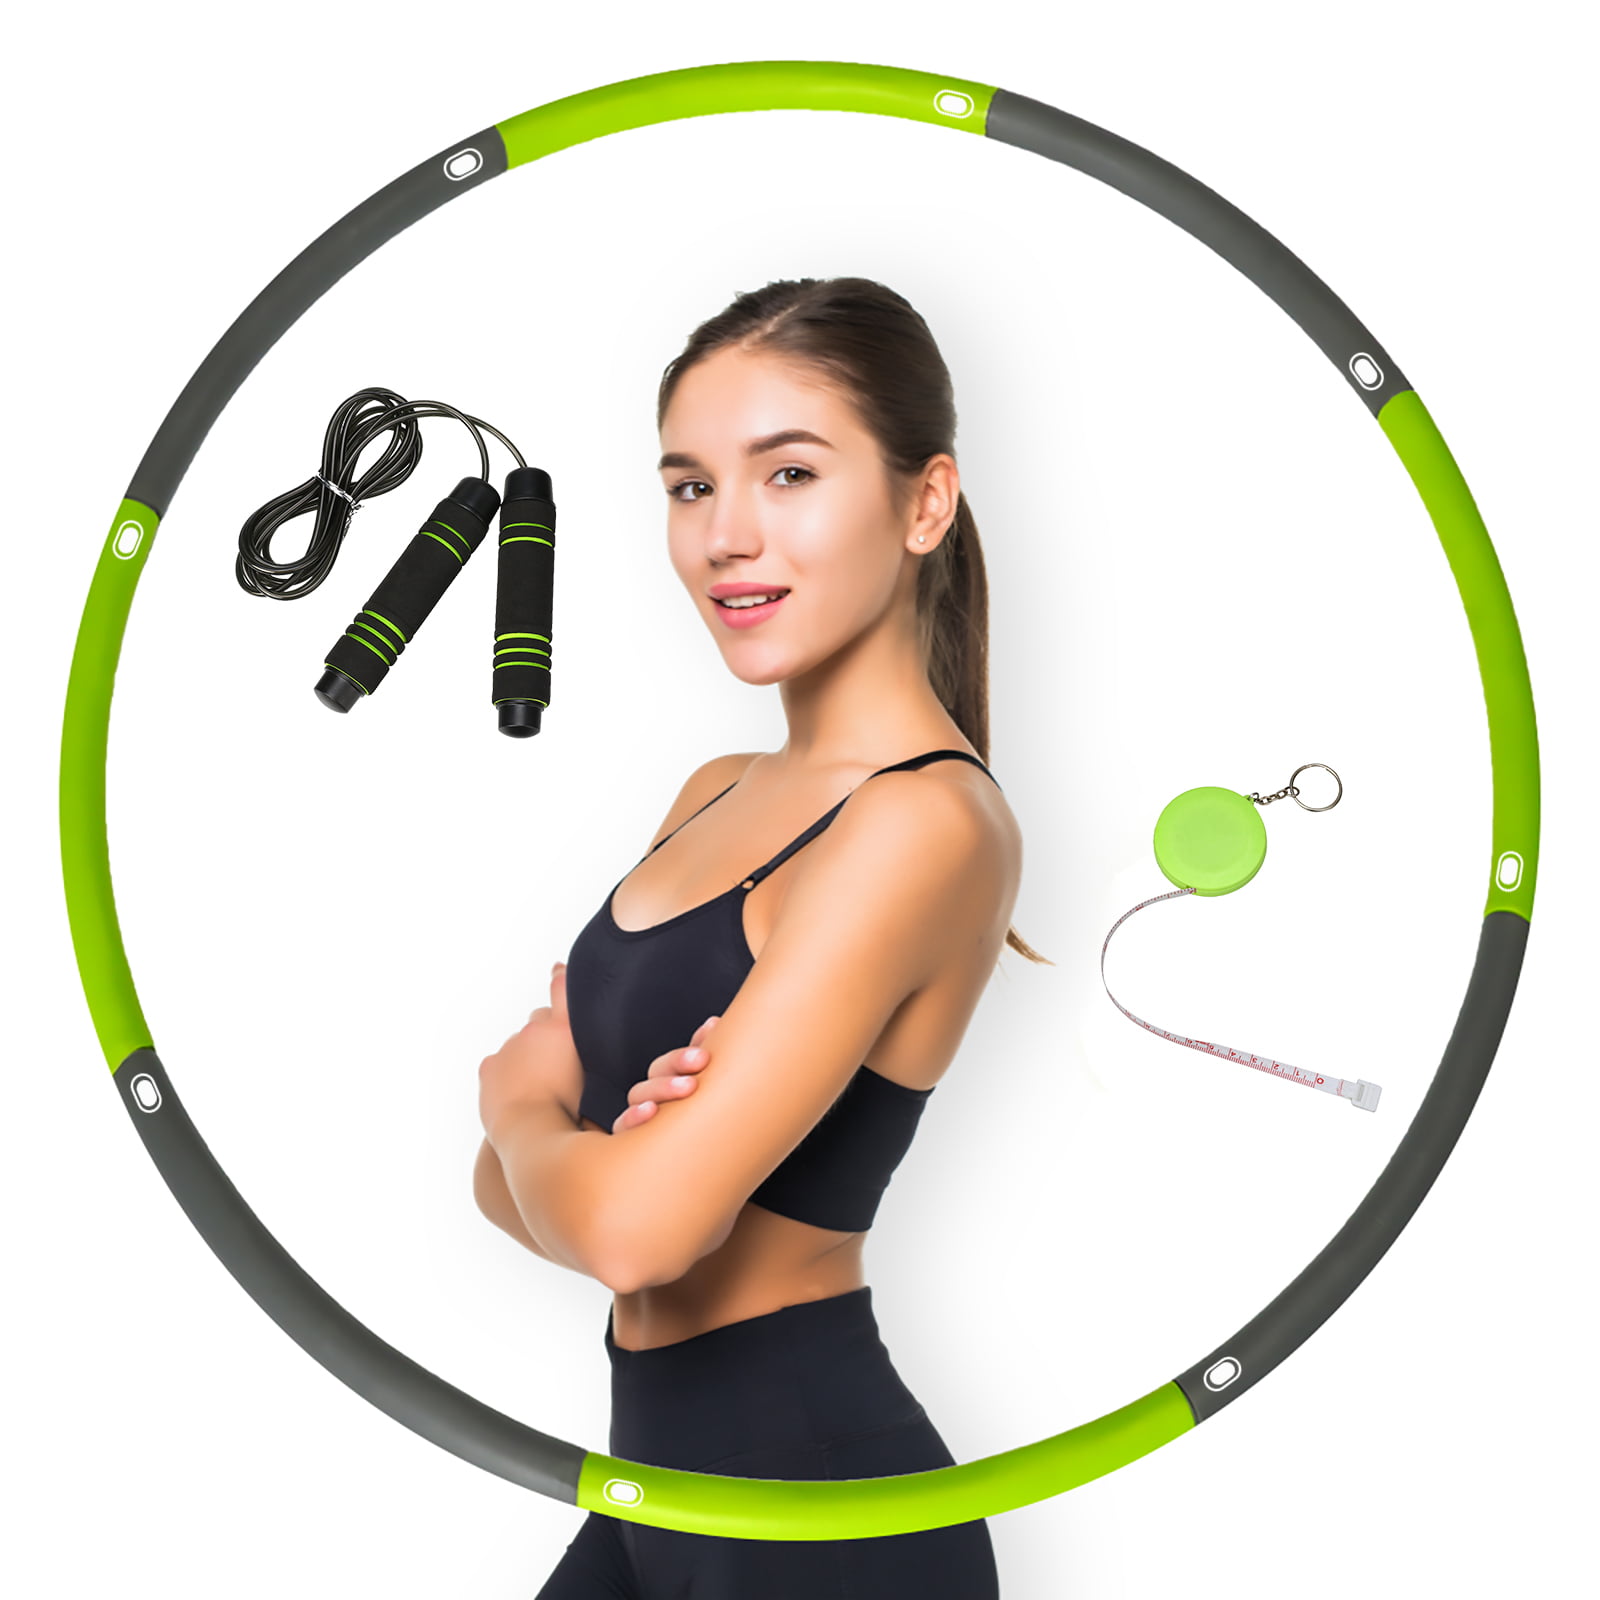 Hula Hoop for Slimming Detachable Fitness Hoop with Foam Adjustable Width for Adults Help You Lose Weight by Burning Calories Green 